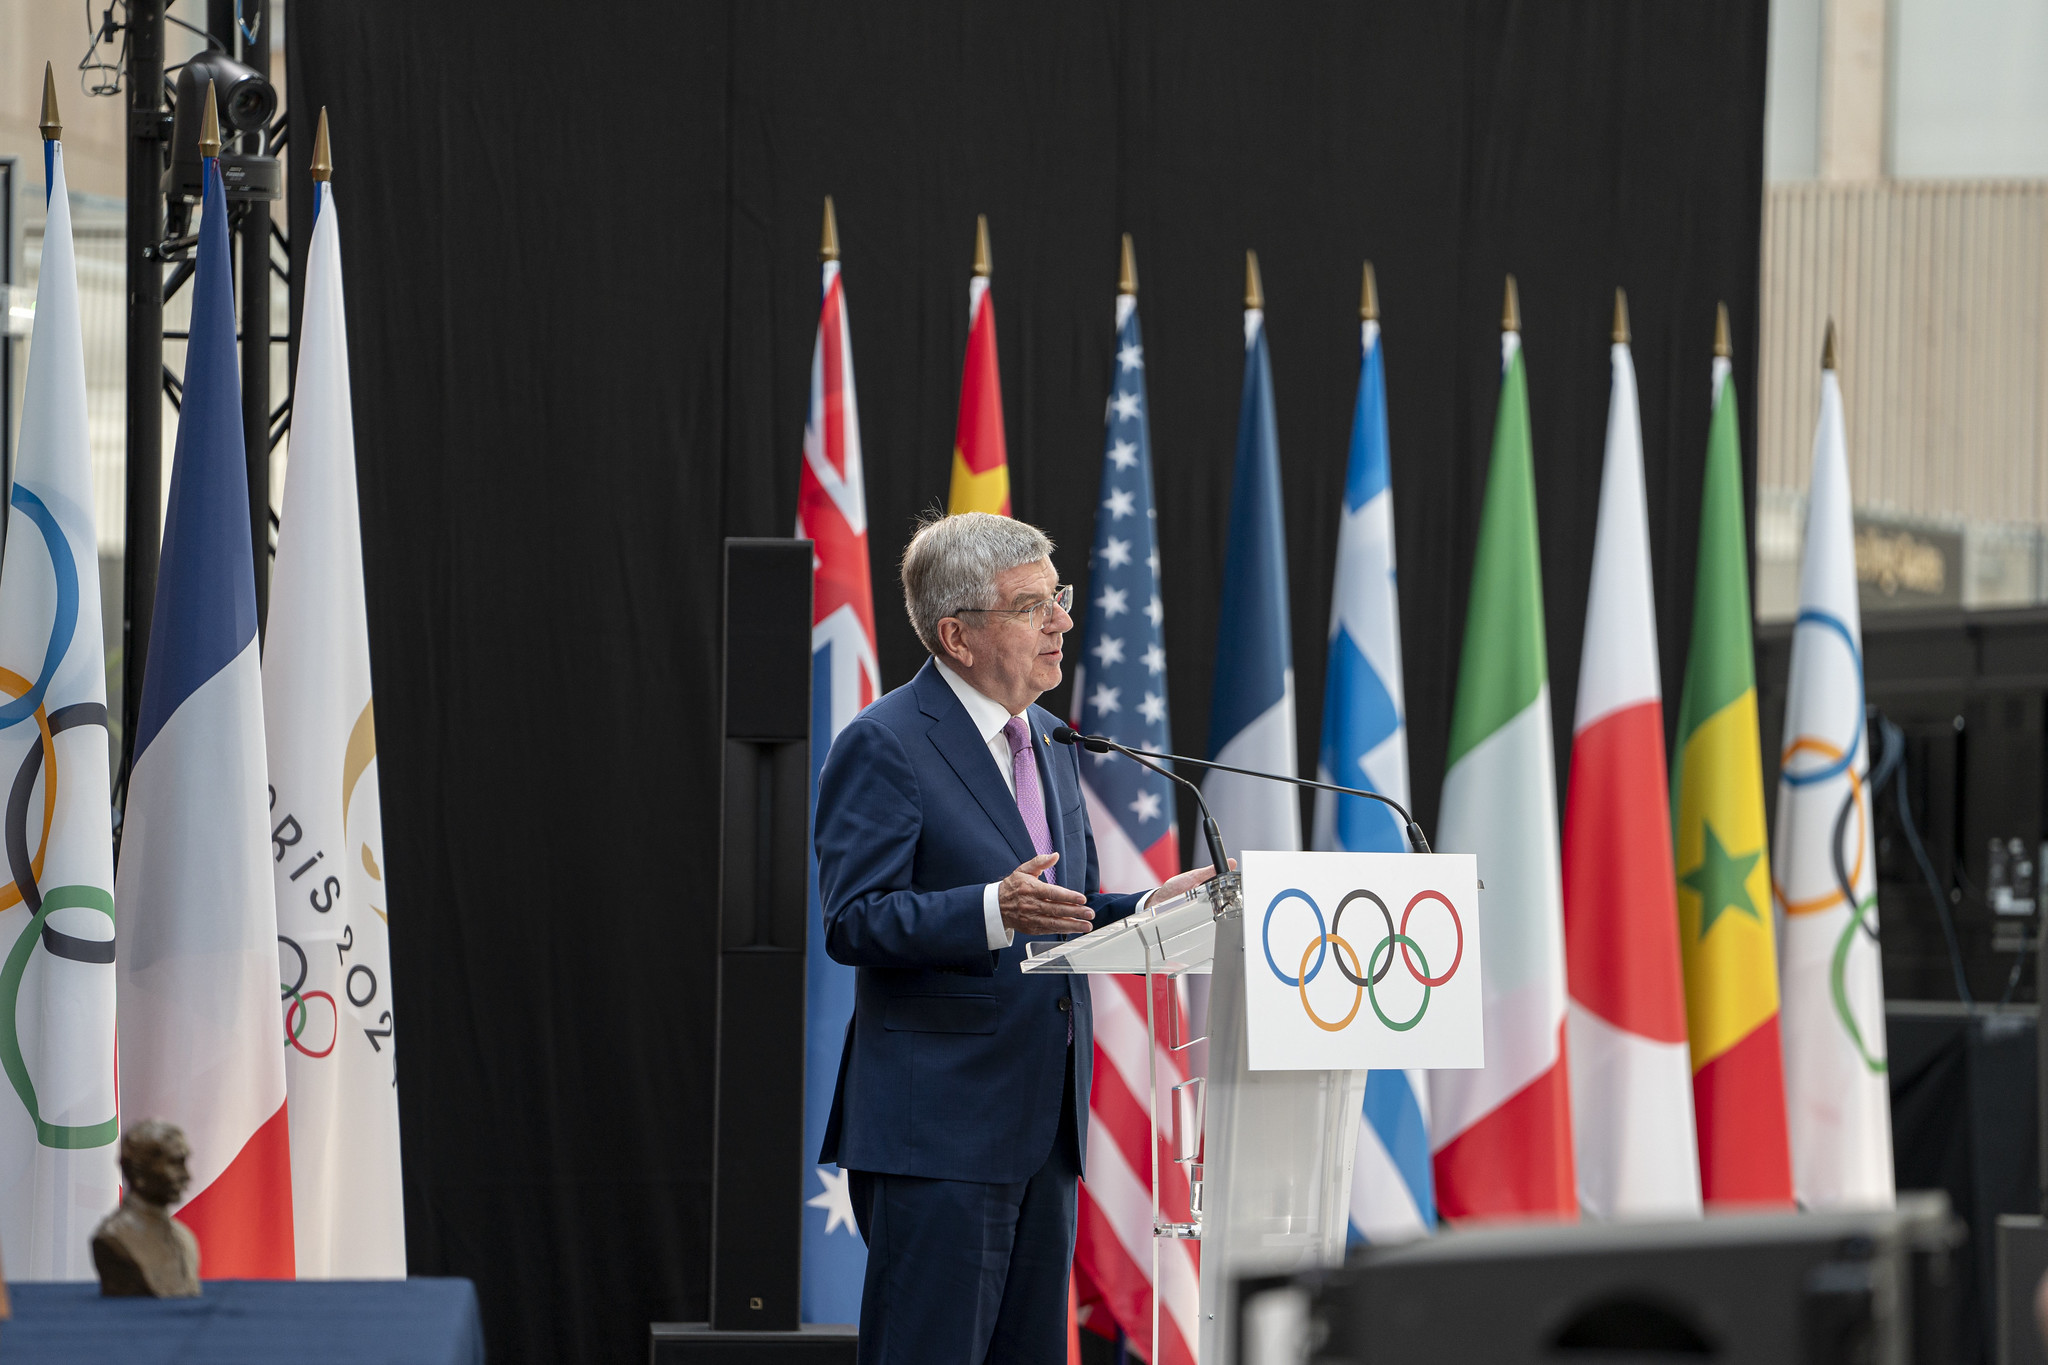 2028 L.A. Olympic Games: Agreement outlines key issues - Los